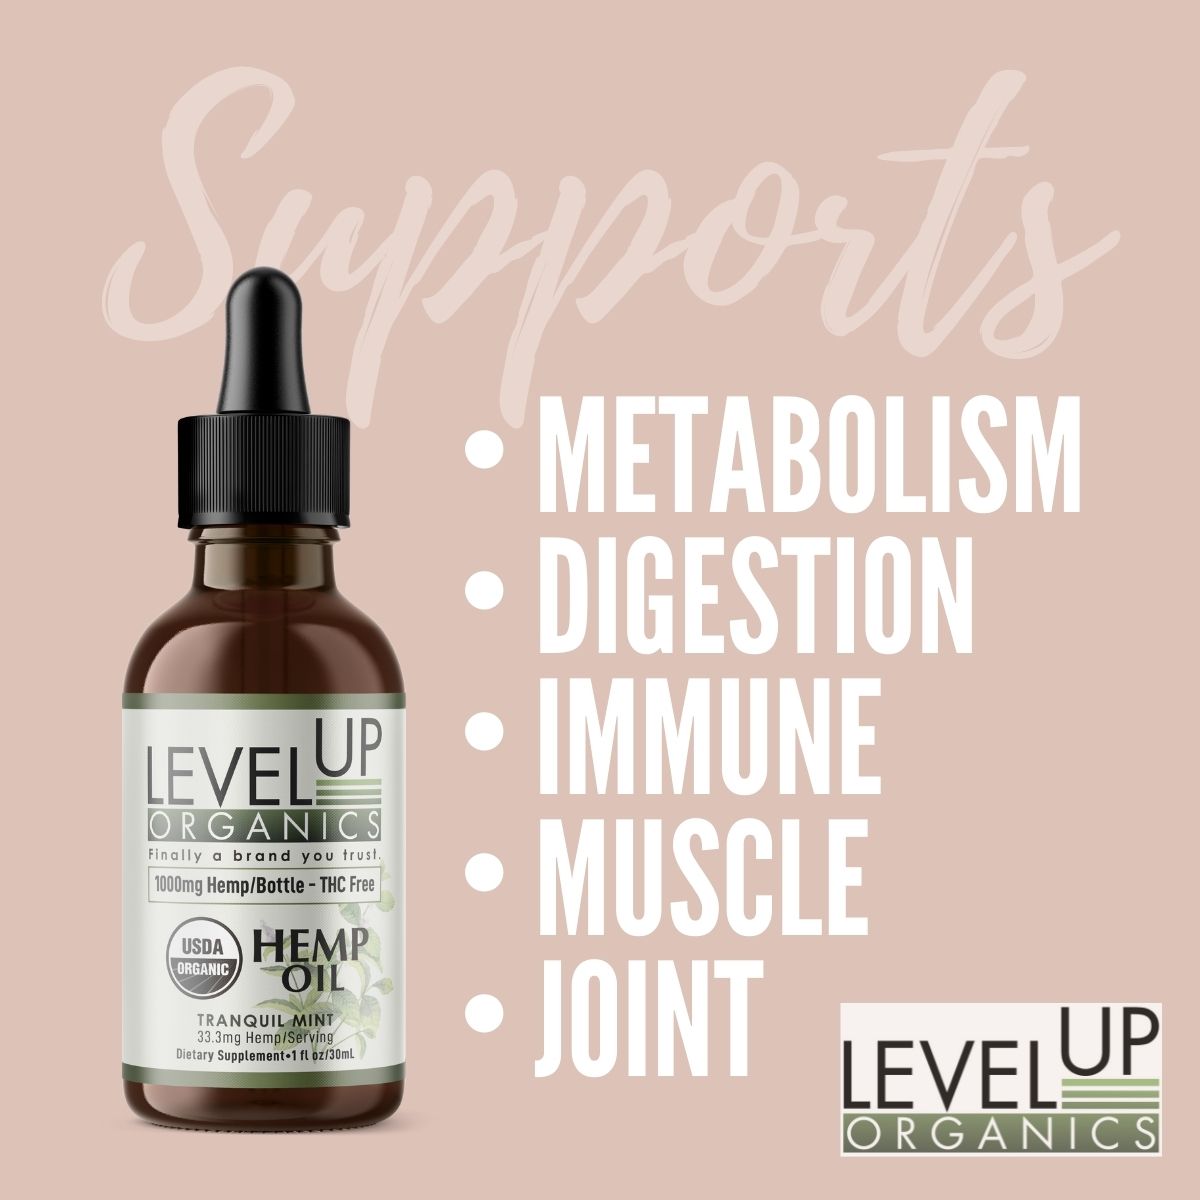 Level Up Organics supports Metabolism, Digestion, Immune, Muscle, Joint